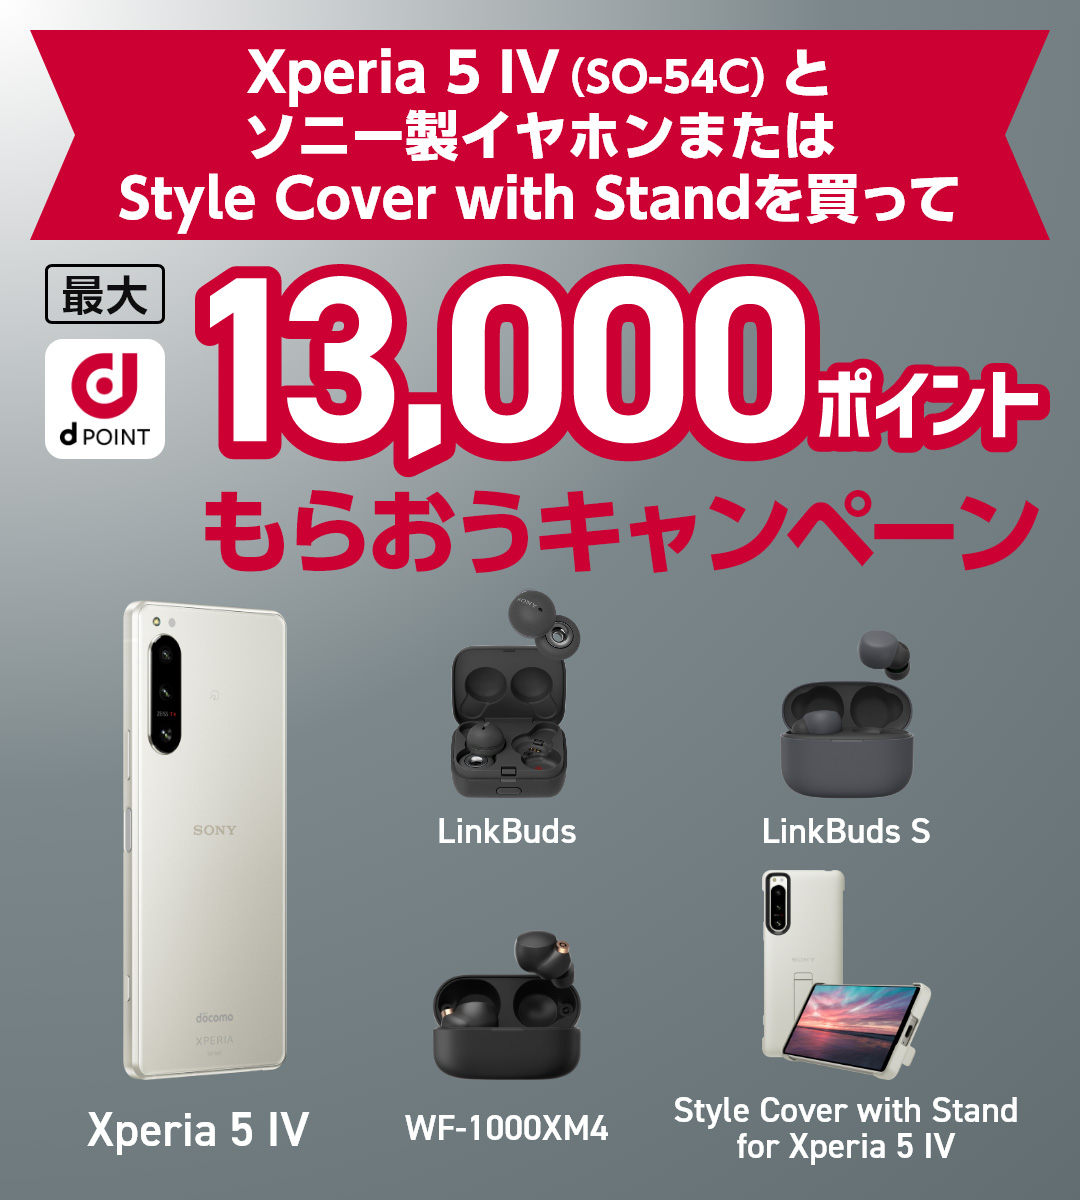 Xperia 5 IV (SO-54C)とソニー製イヤホンまたはStyle Cover with Stand